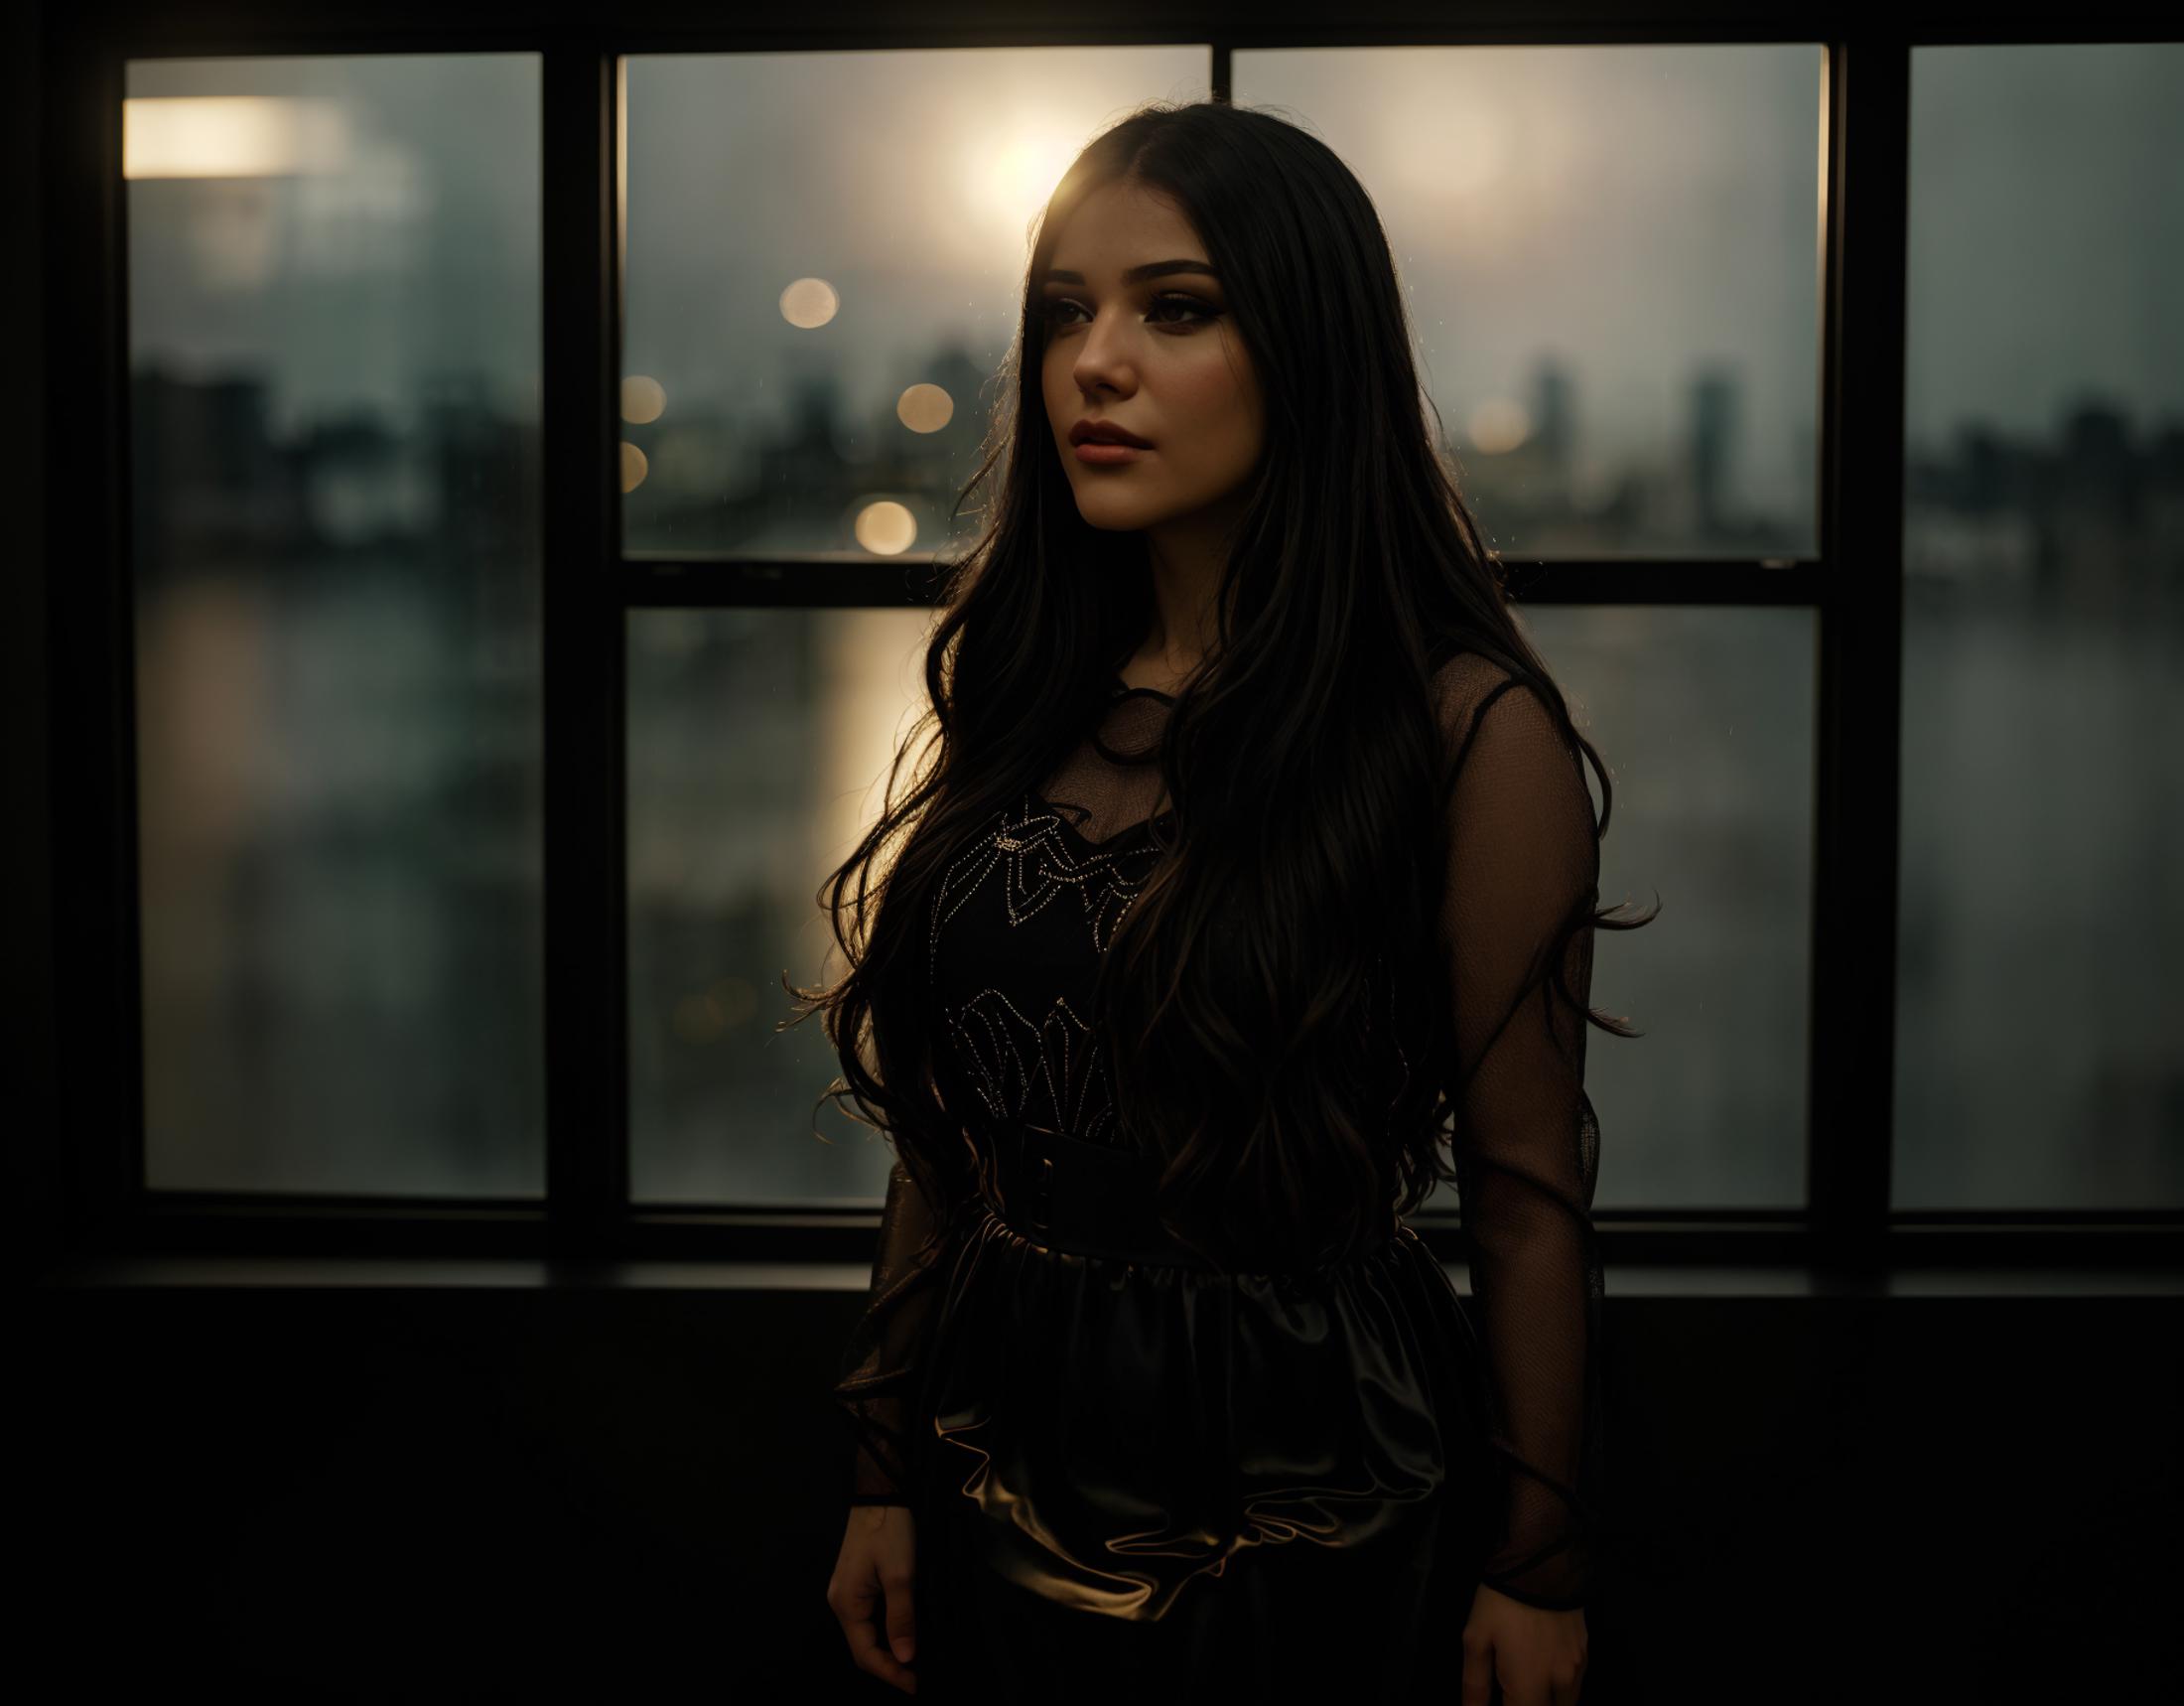 Ambre Vourvahis (Singer - Xandria) image by WillieF